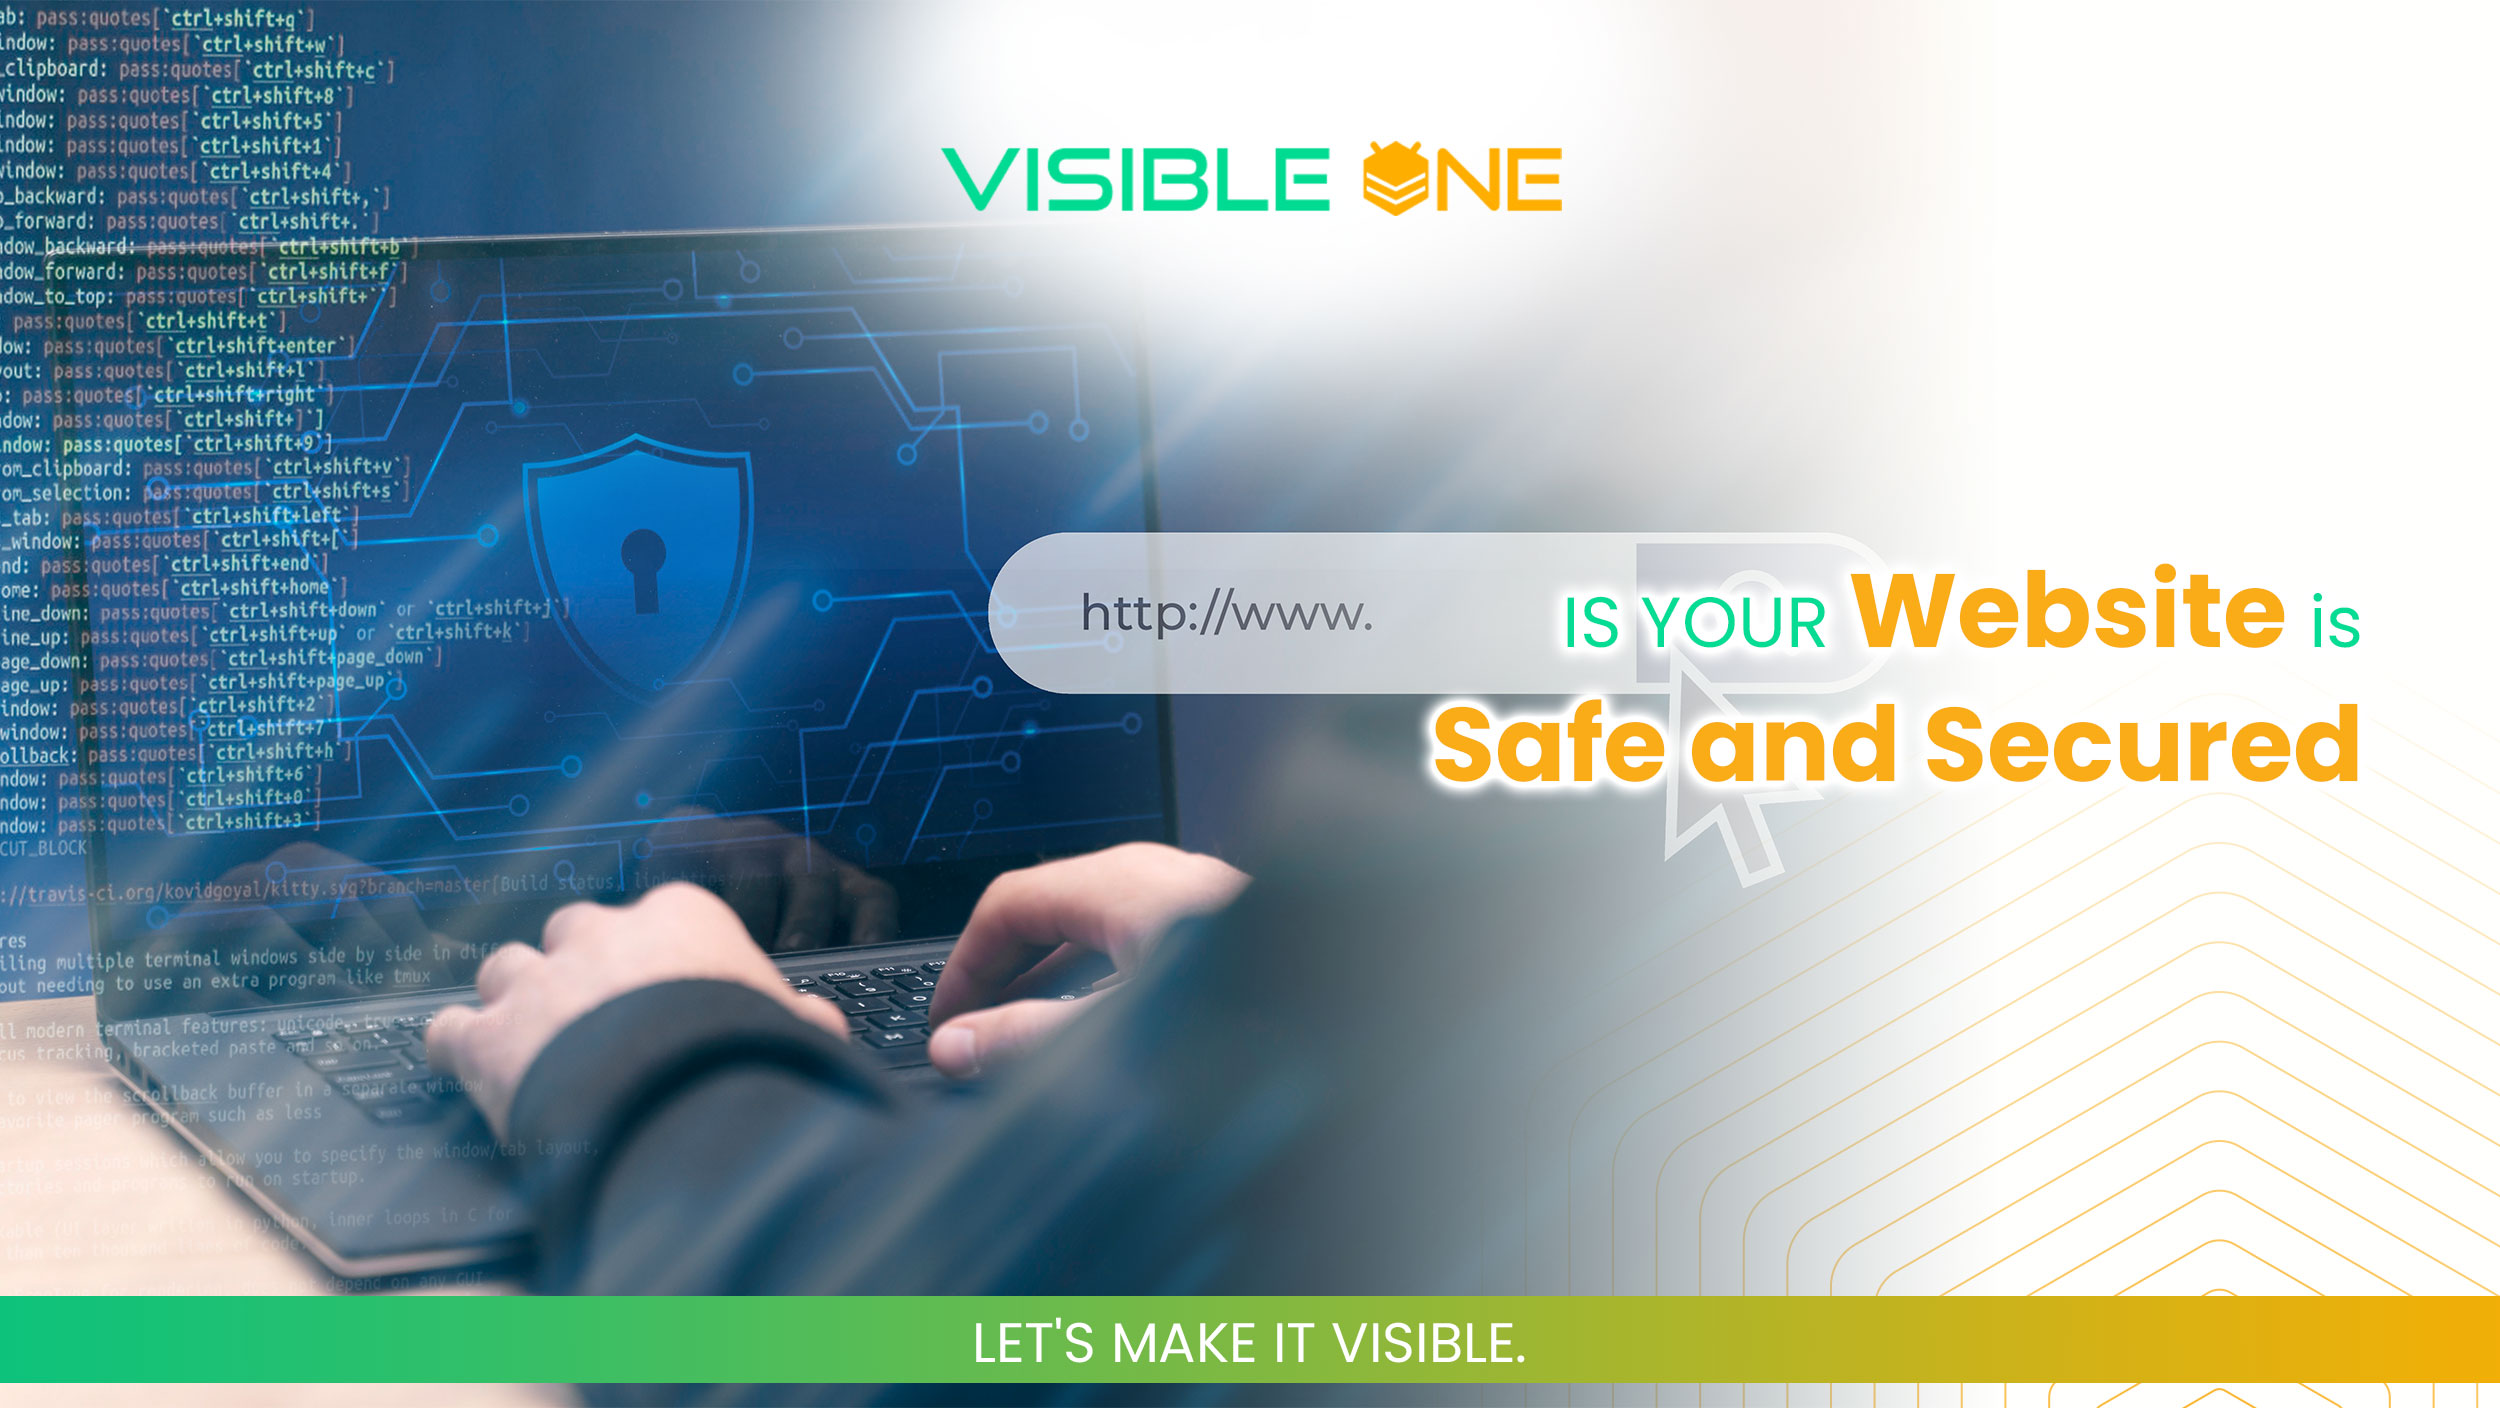 IS YOUR WEBSITE IS SAFE AND SECURED